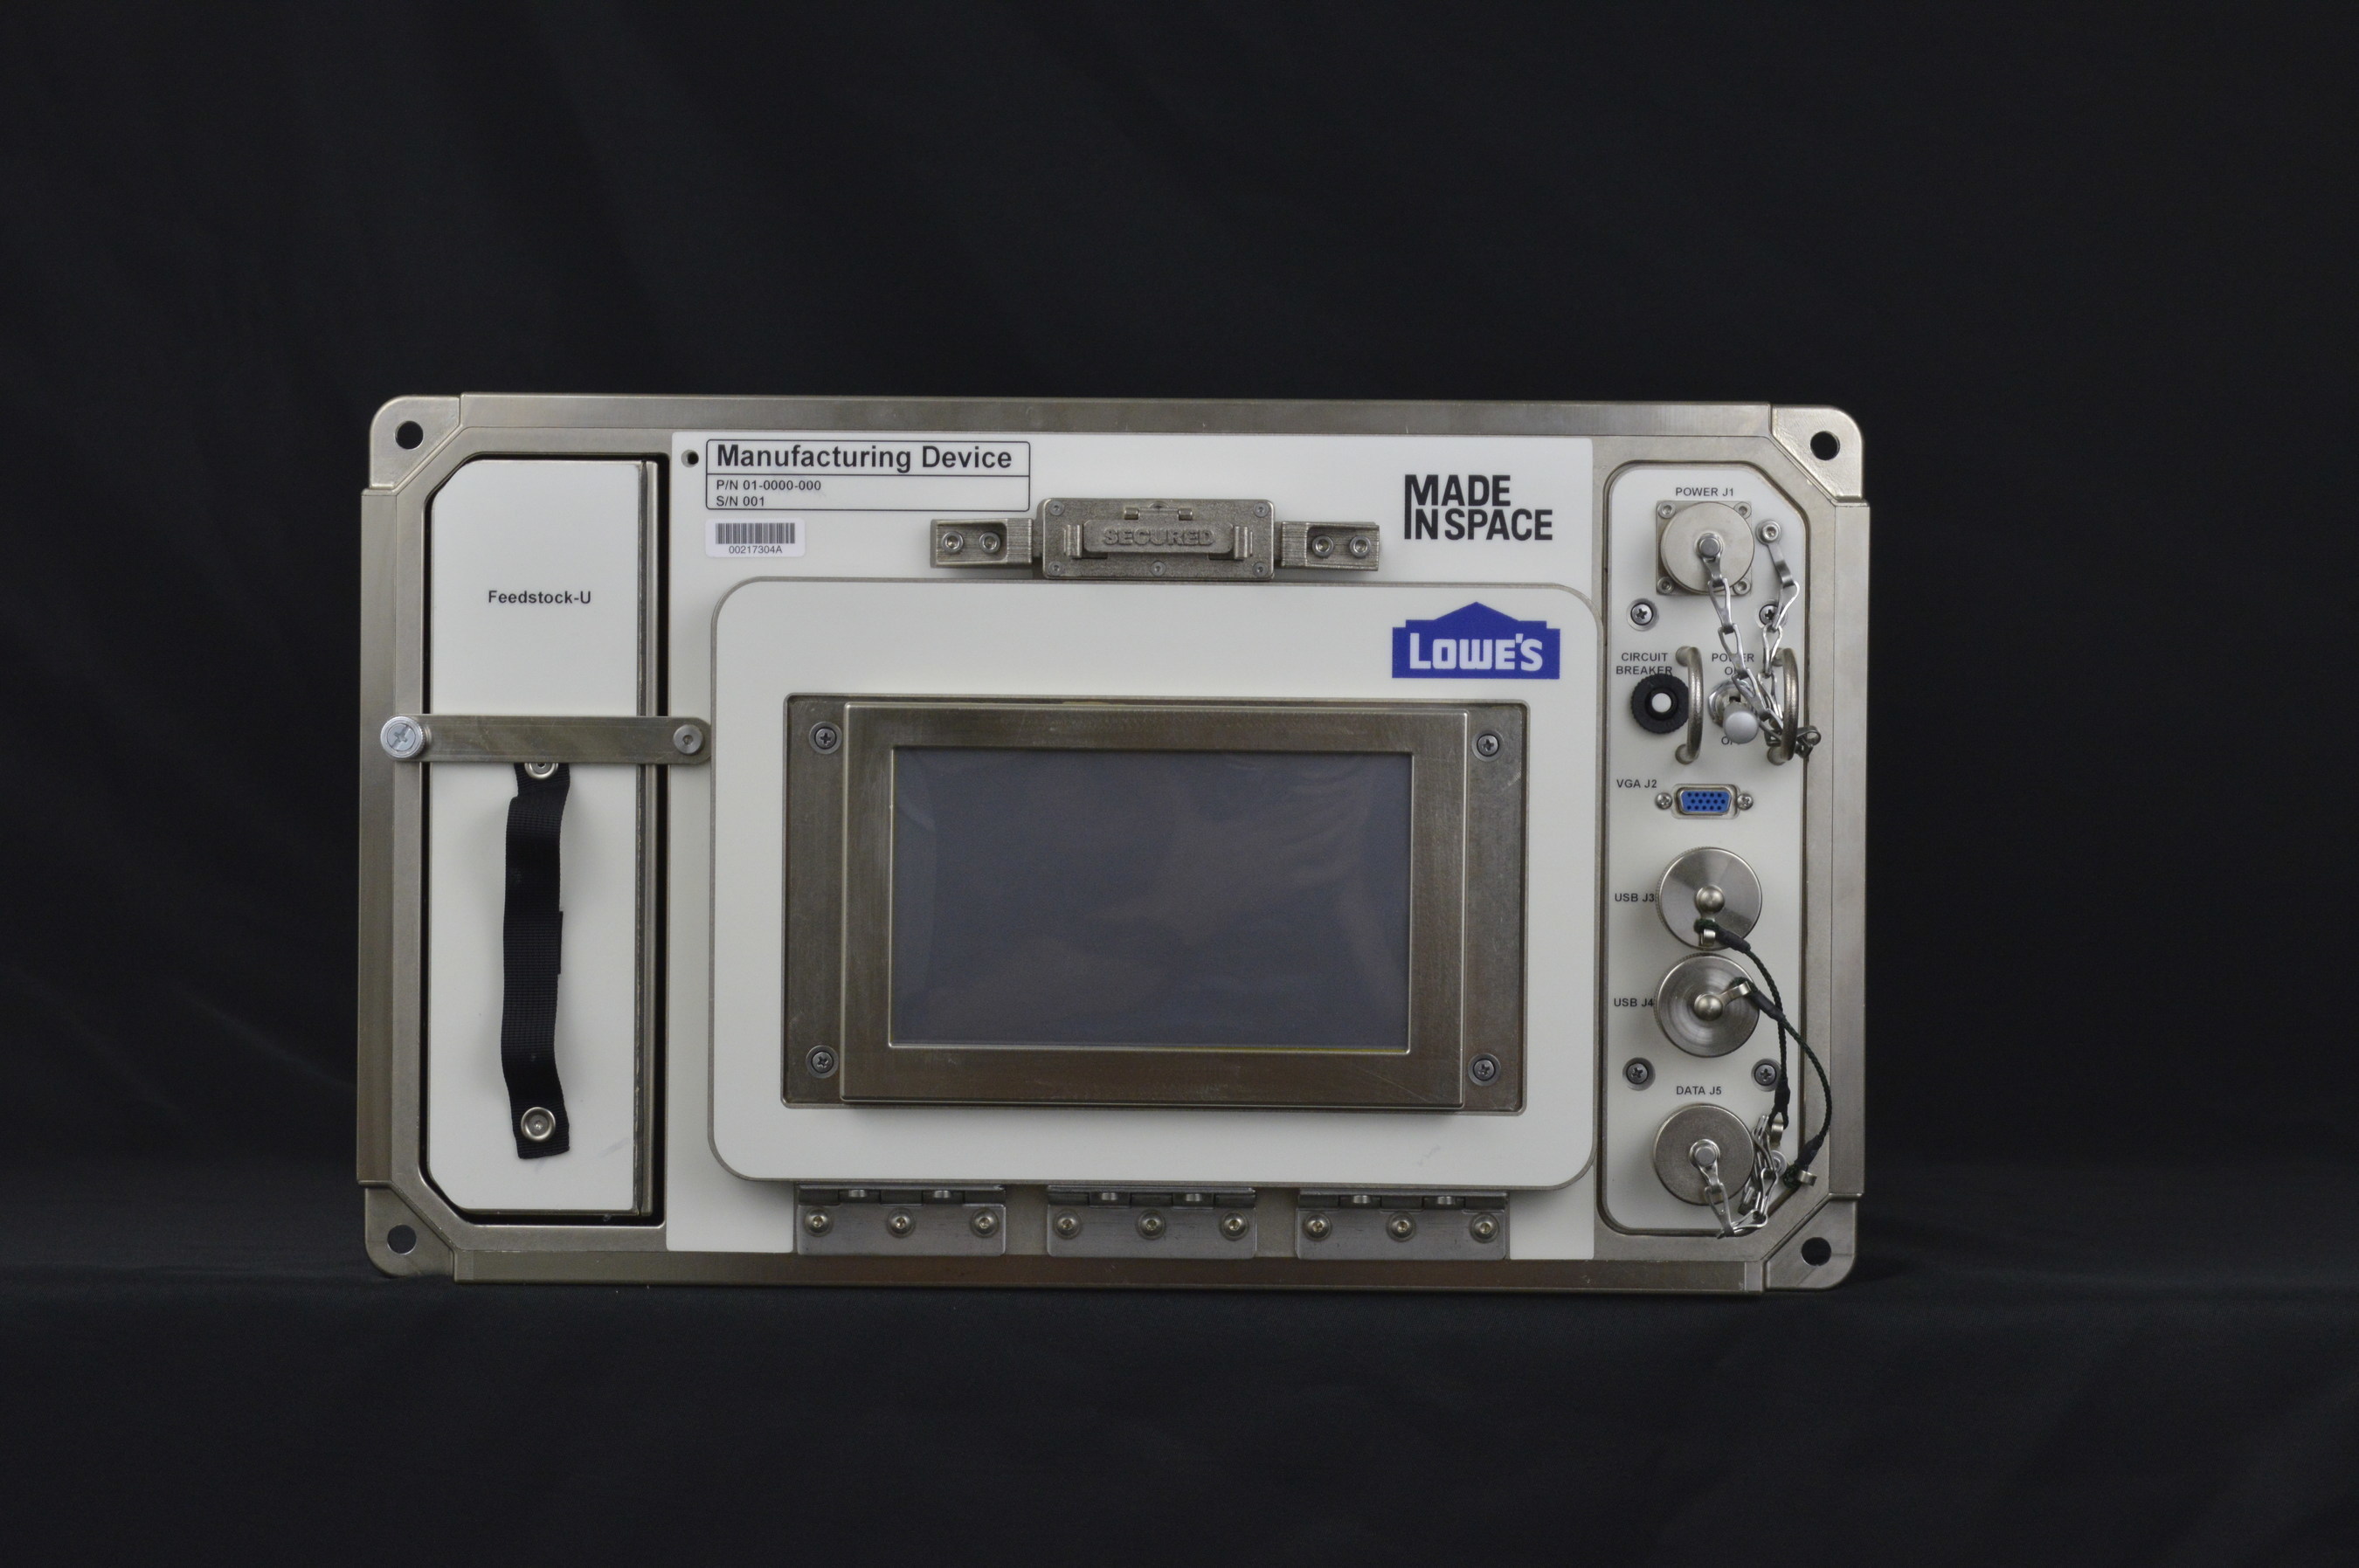 The Lowe's 3D printer is slated to arrive at the International Space Station in early 2016.